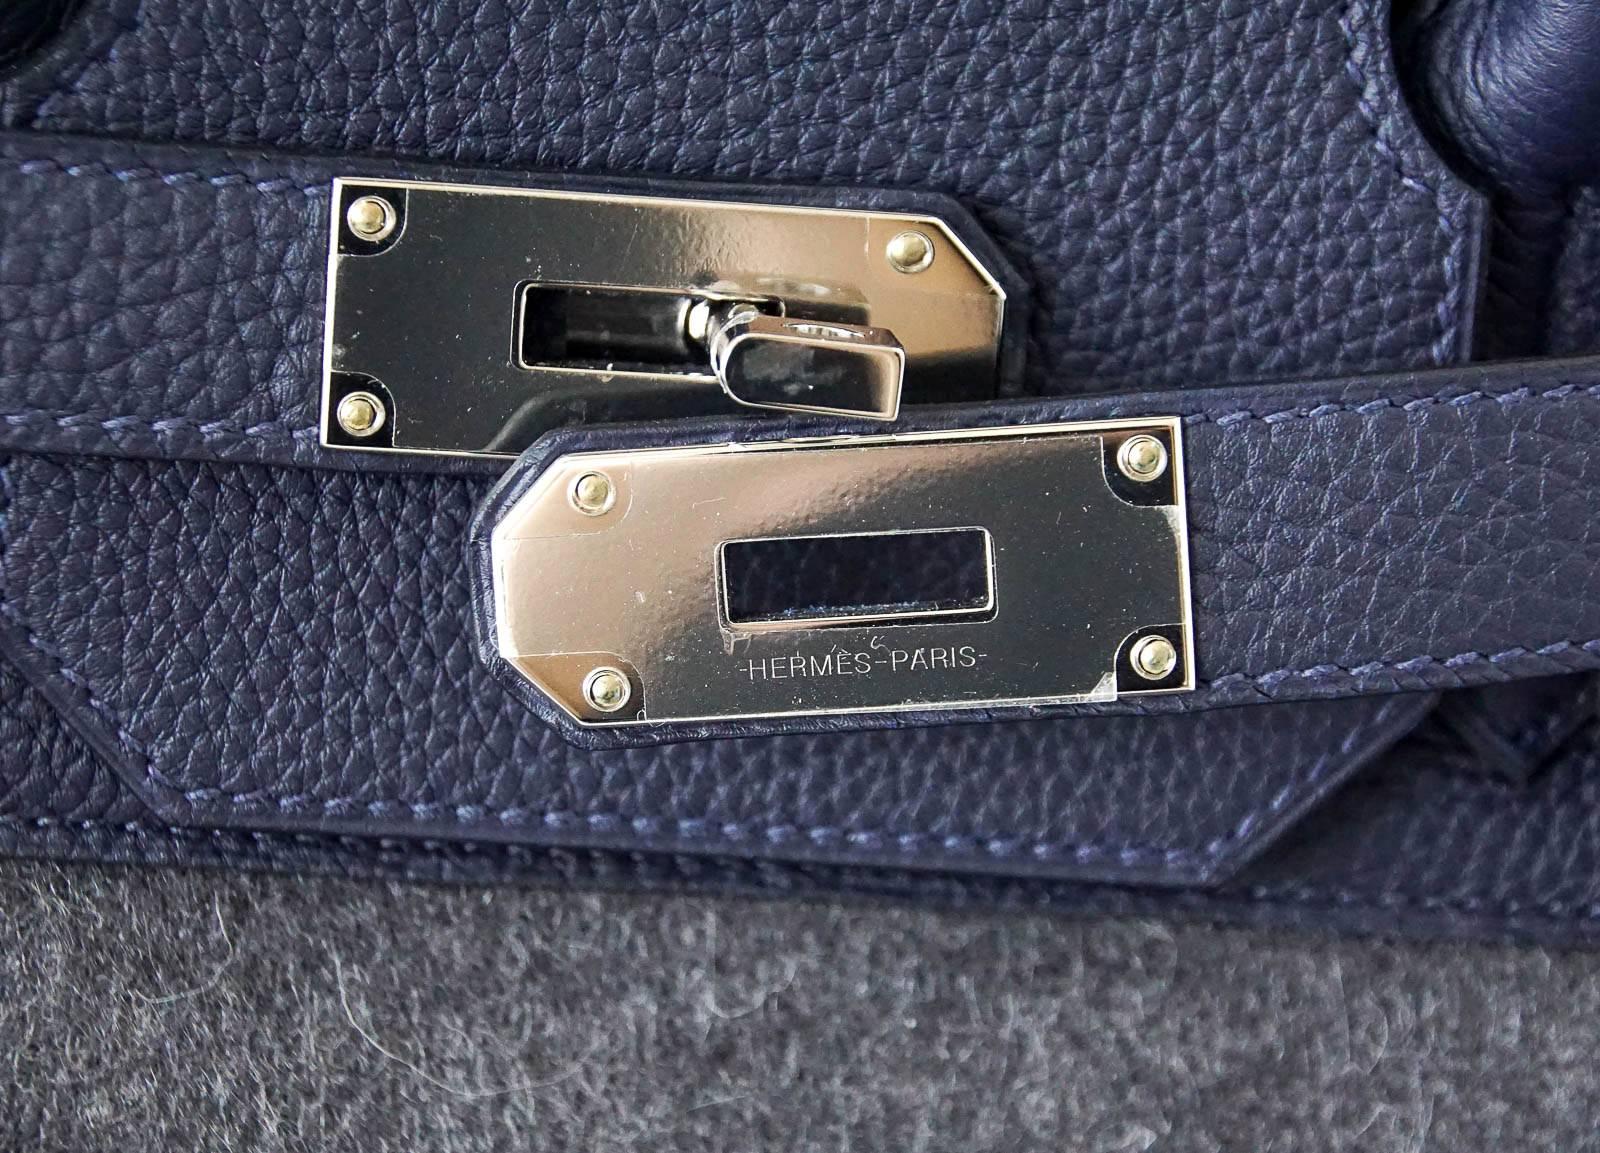 Guaranteed authentic rare 40 Hermes Sac Haut a Courroies (HAC) in Gris Moyen (Medium Grey) Todoo Feutre (Wool) and Blue Nuit in Togo leather exclusive travel bag. 
Chic and masculine combination with palladium hardware.  
Comes with lock, keys and